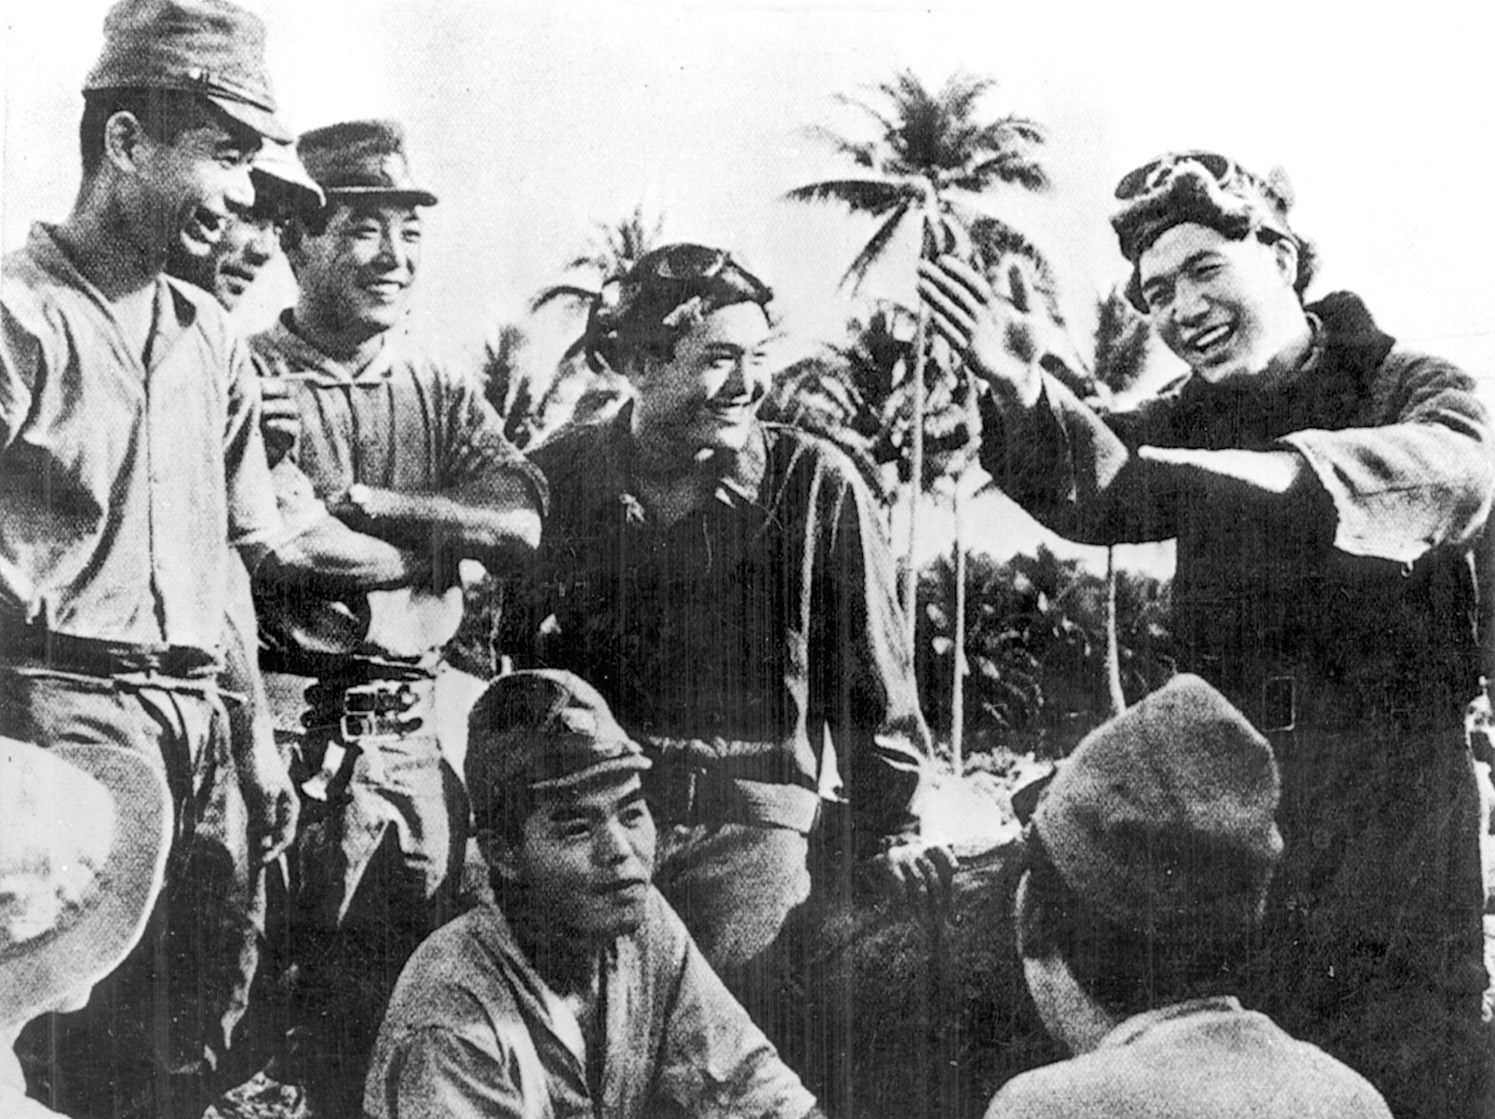 A Japanese pilot recounts his experience in aerial combat over Wake.